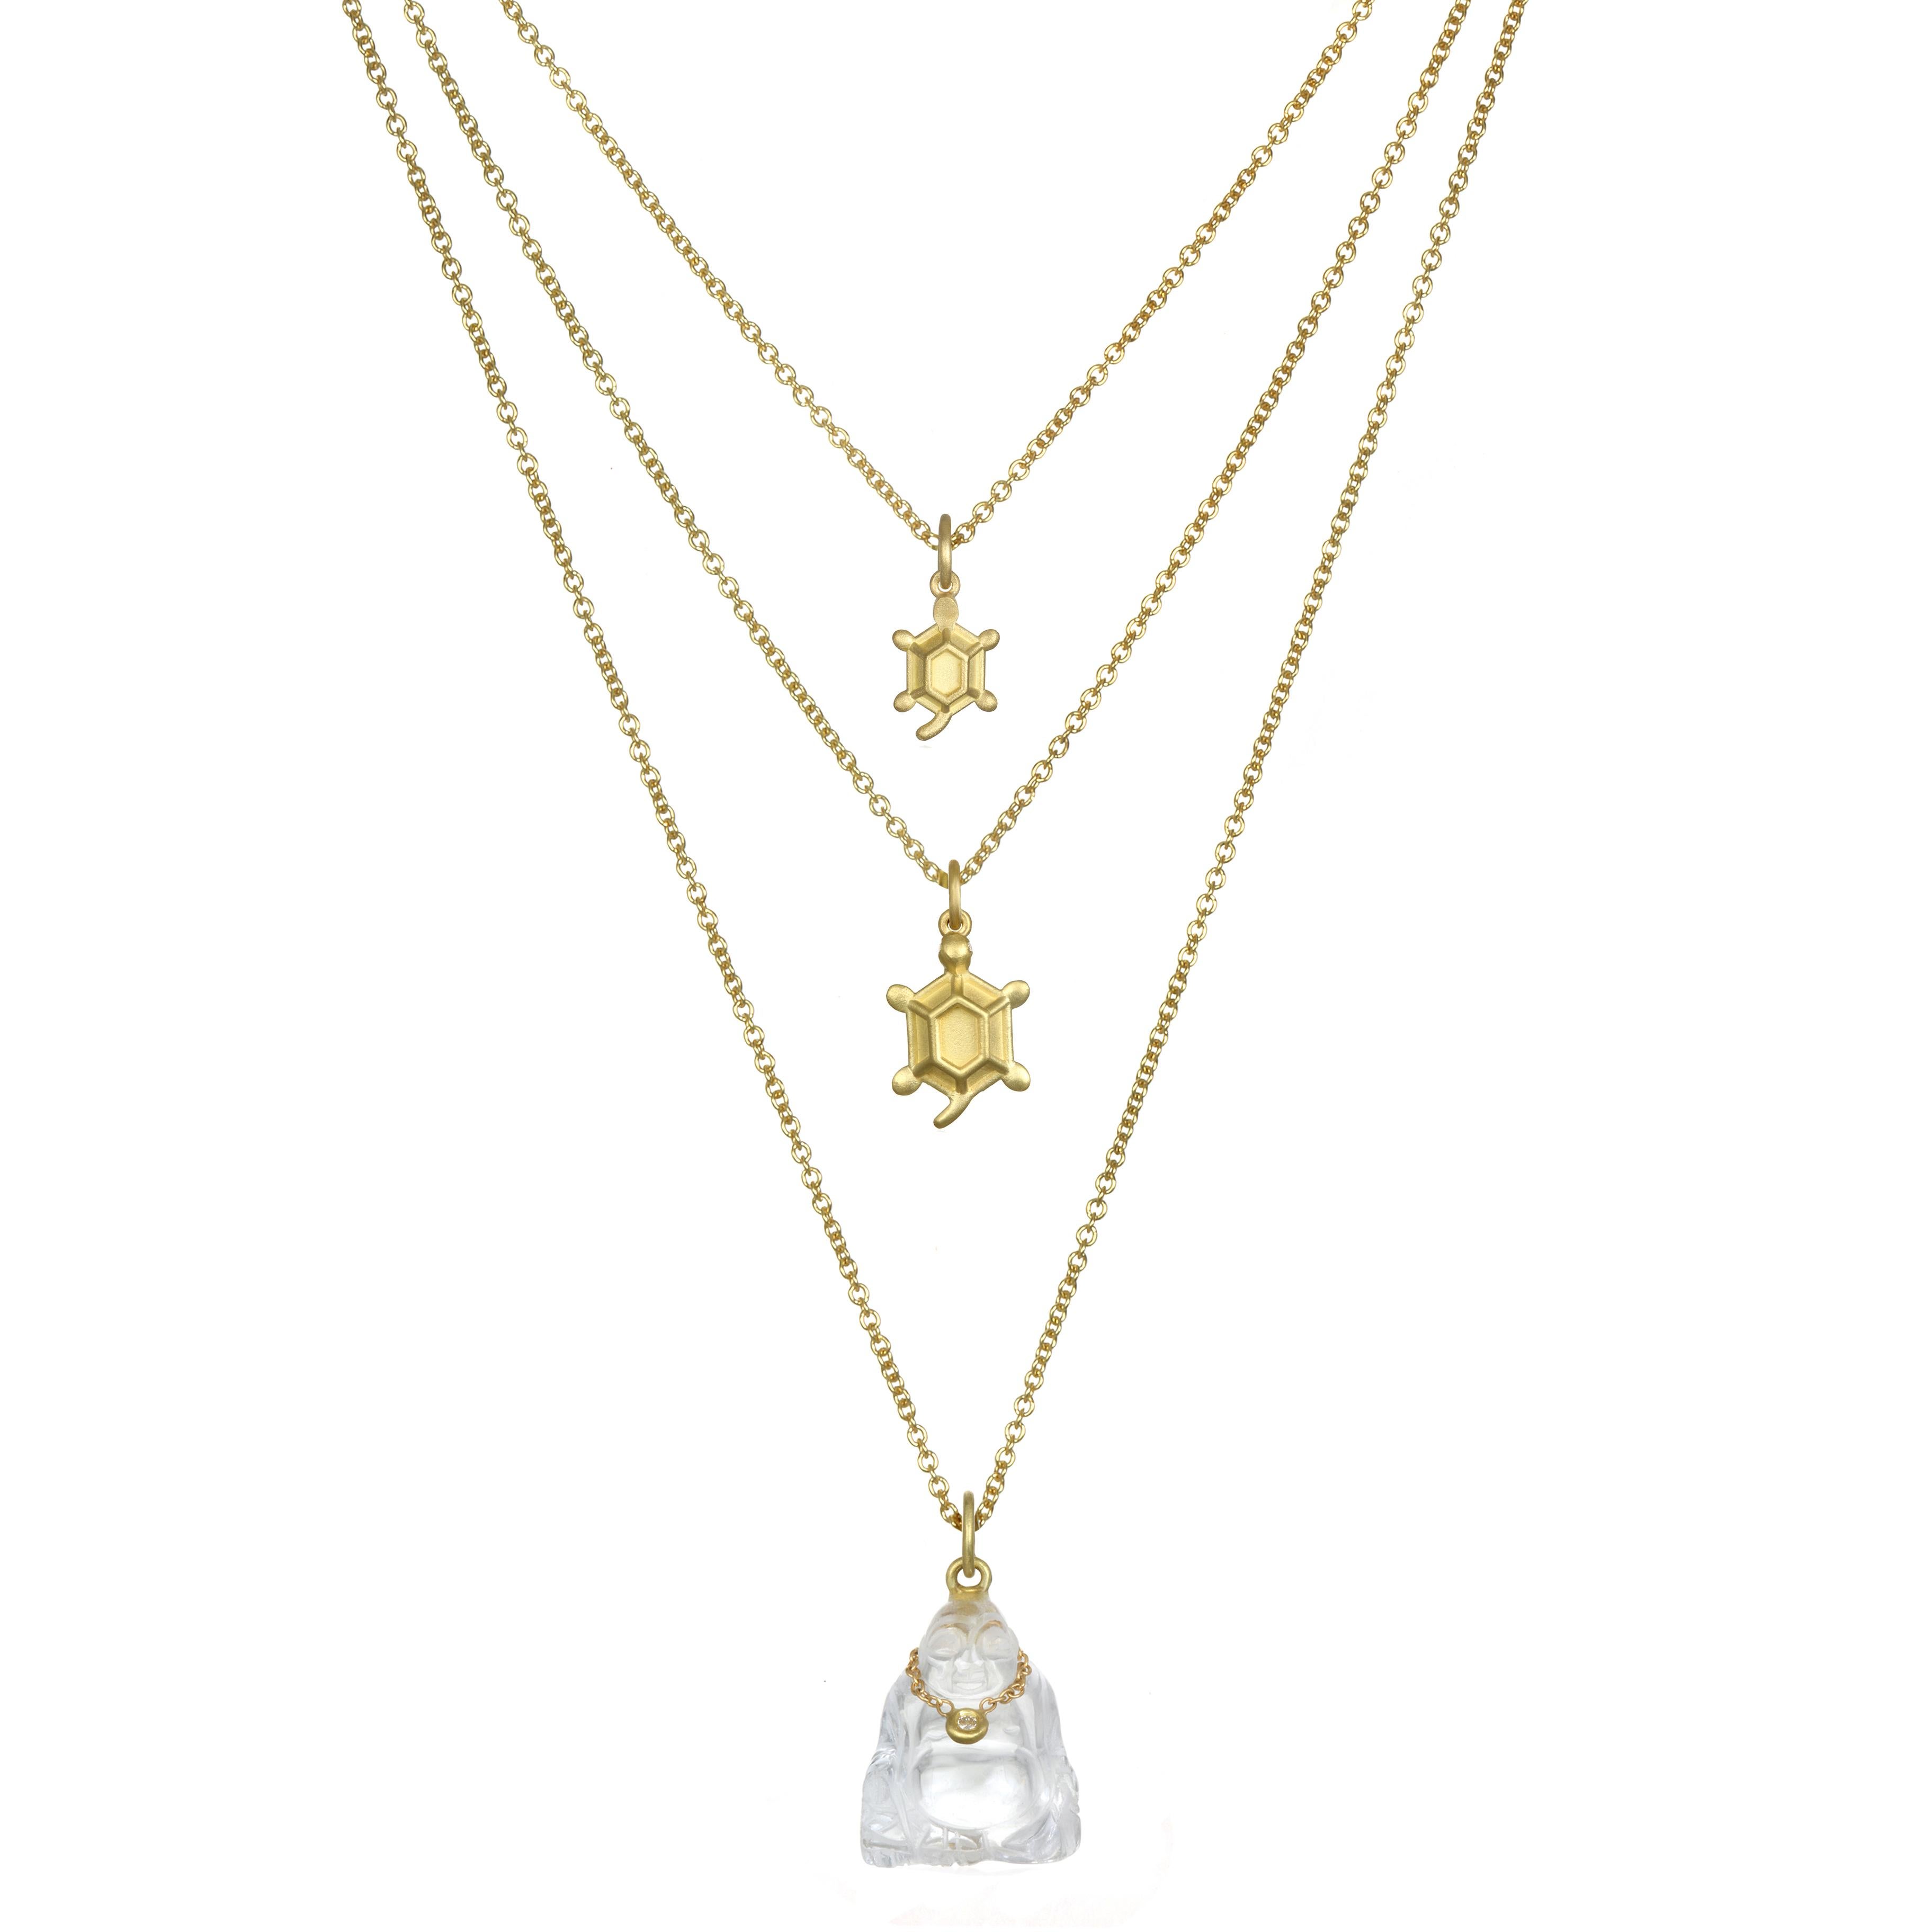 For the turtle lover - symbolizing good health and longevity. 
This turtle charm is crafted in 18 Karat Gold with white diamond eyes. The cable chain is 16-18